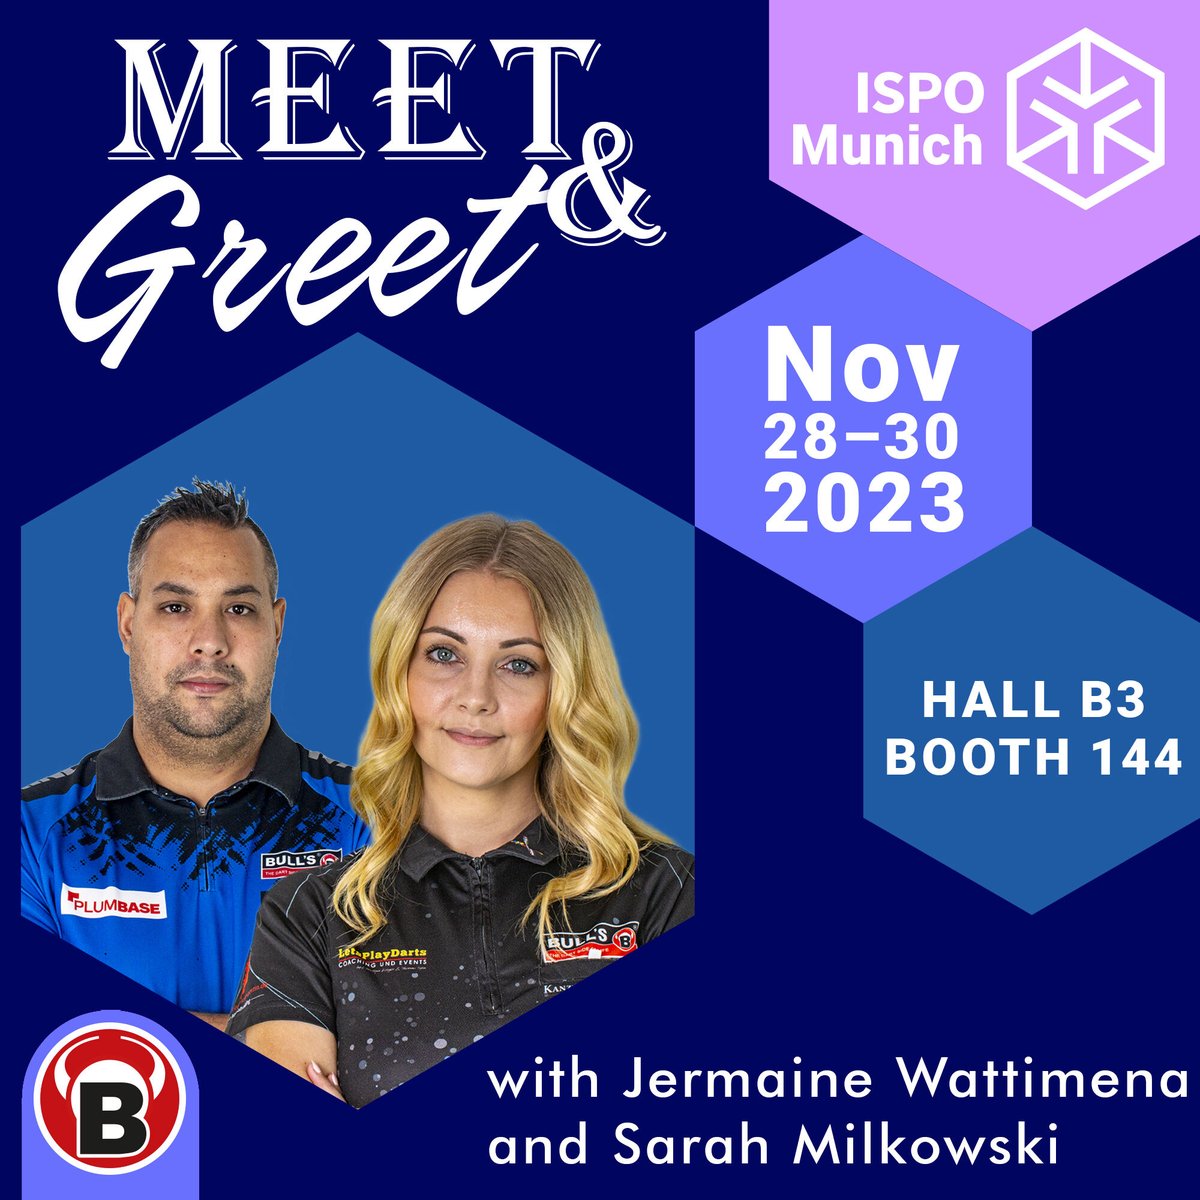 It's ISPO time. This year we are pleased to welcome two players from our #Bullsteam 🎉 Sarah will be at our stand on all three days and Jermaine will join us on Thursday. We are looking forward to a few exciting days.🙌 #WeLoveDarts #BullsDarts #Darts #sarahmilkowska #ISPO